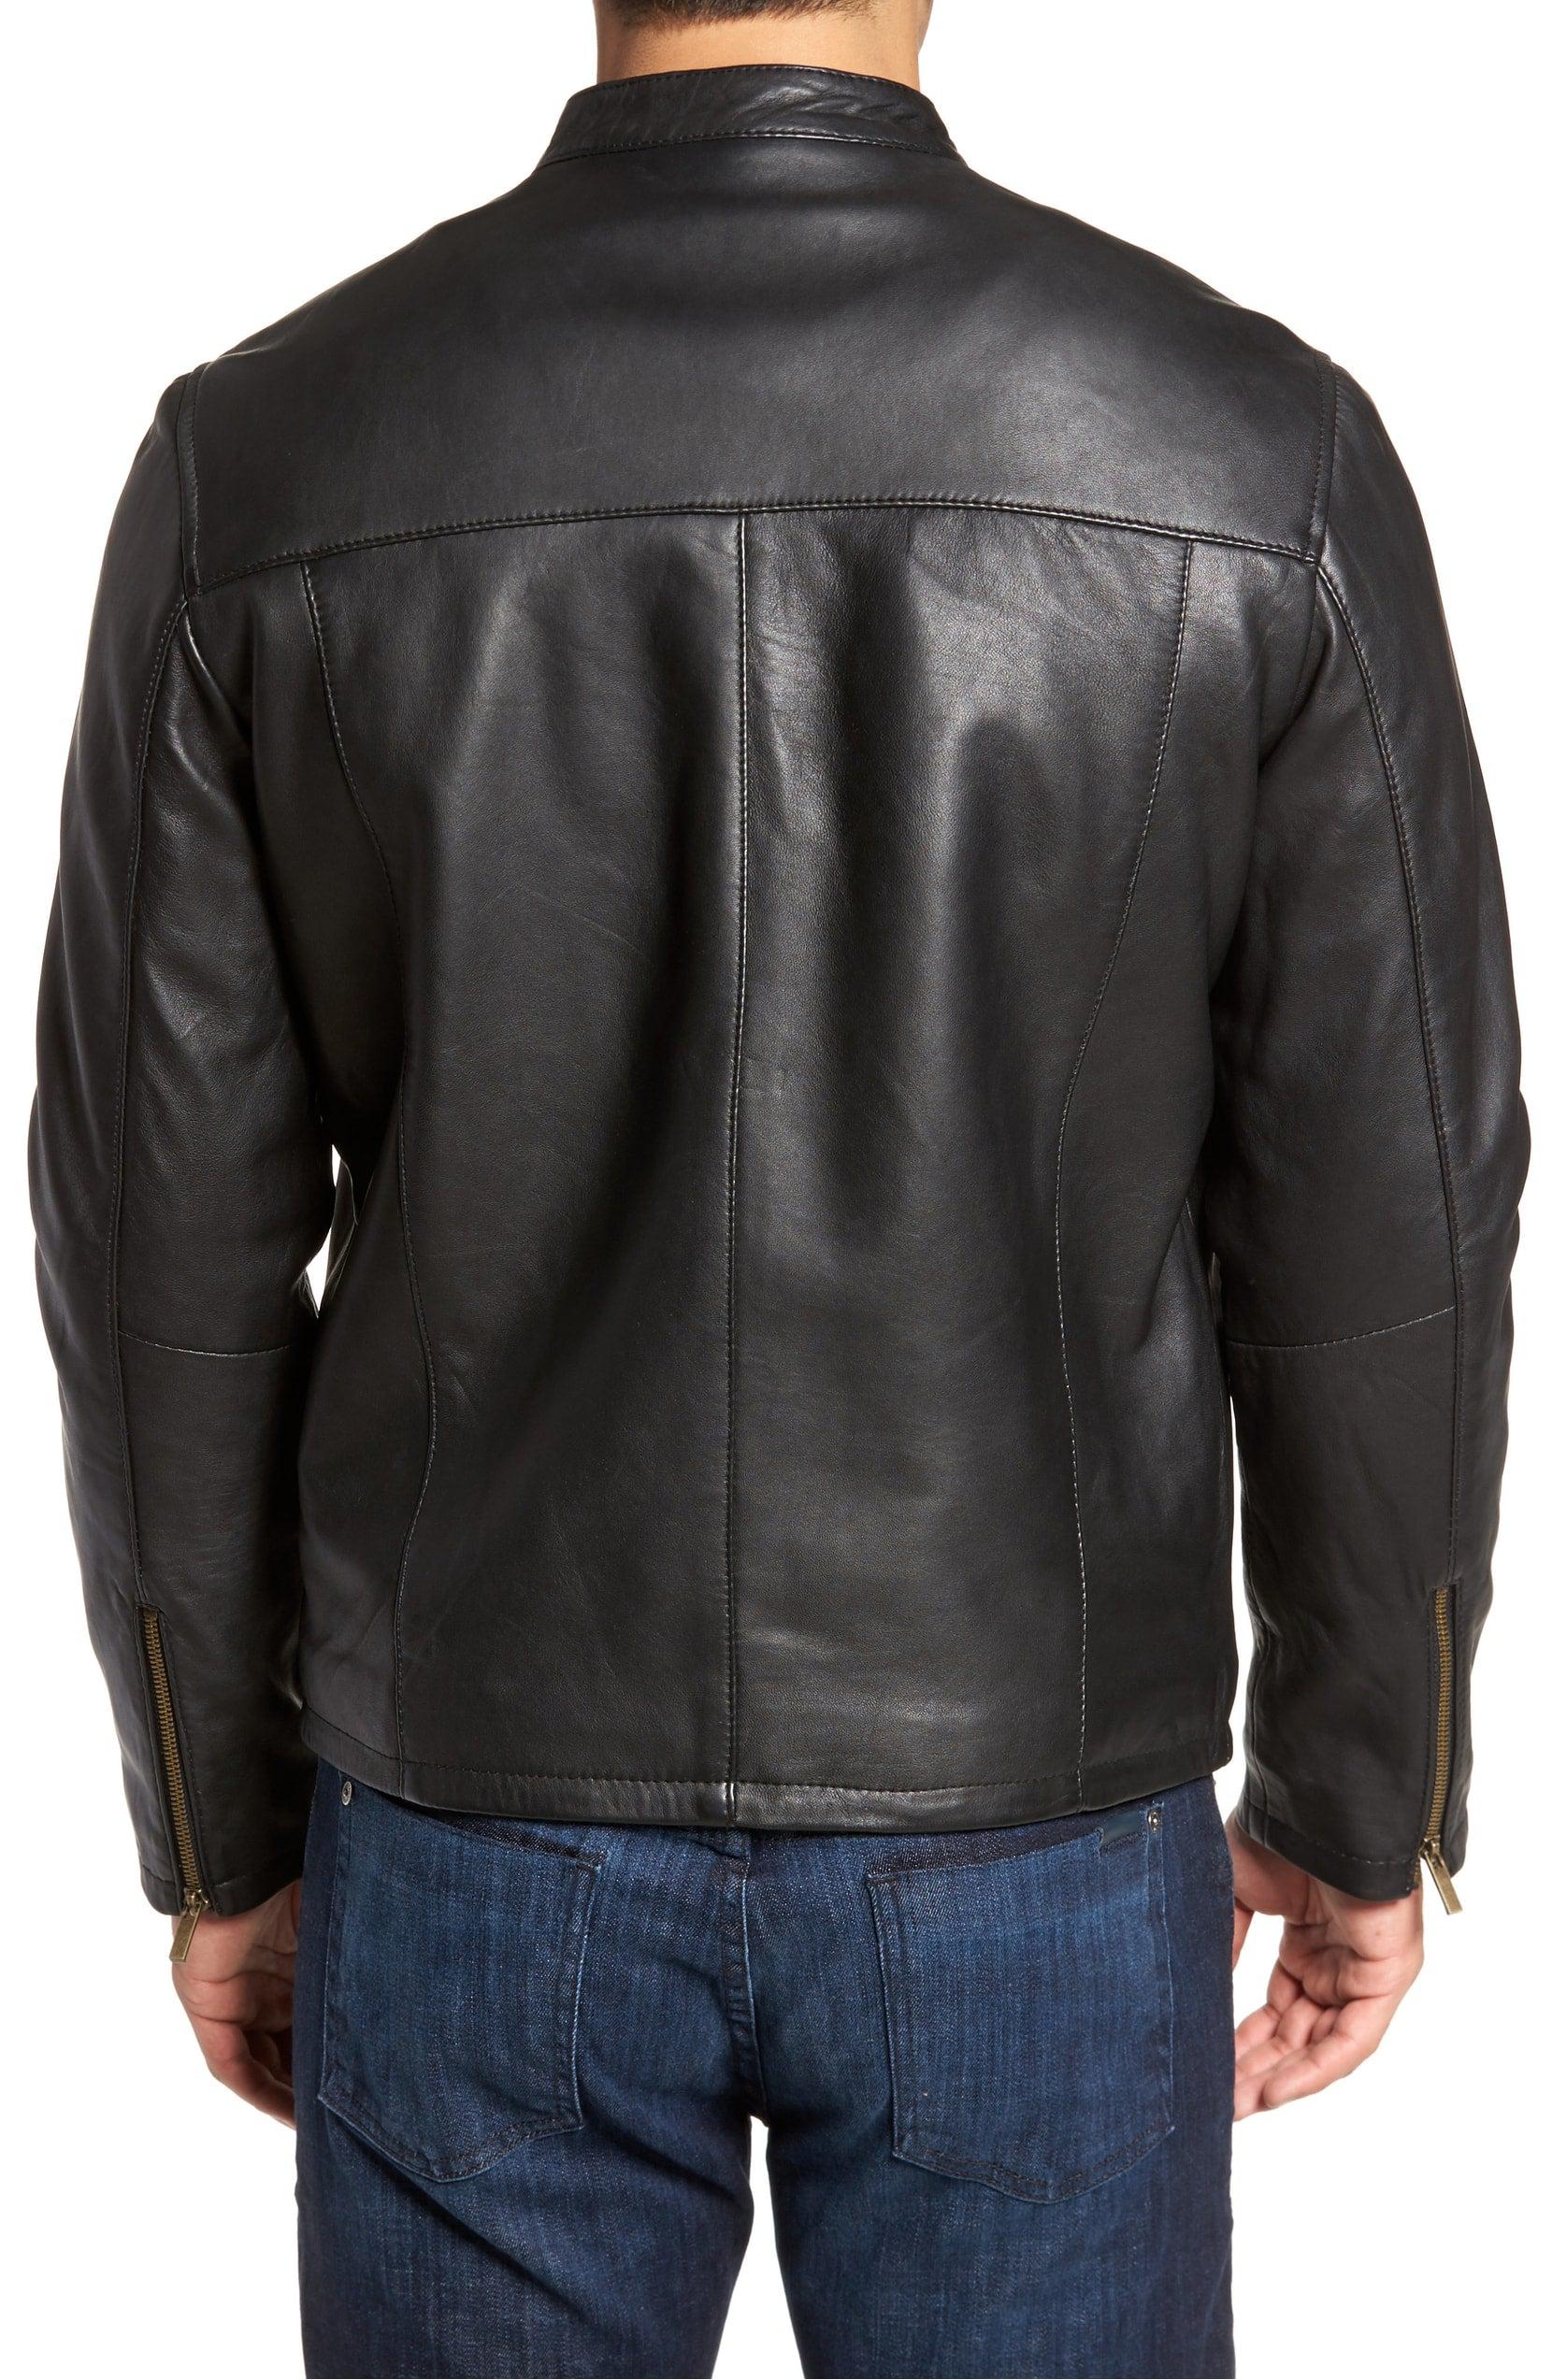 Men's Perfecto Cowhide Leather Motorcycle Jacket | Mens leather clothing, Leather  jacket men, Motorcycle jacket